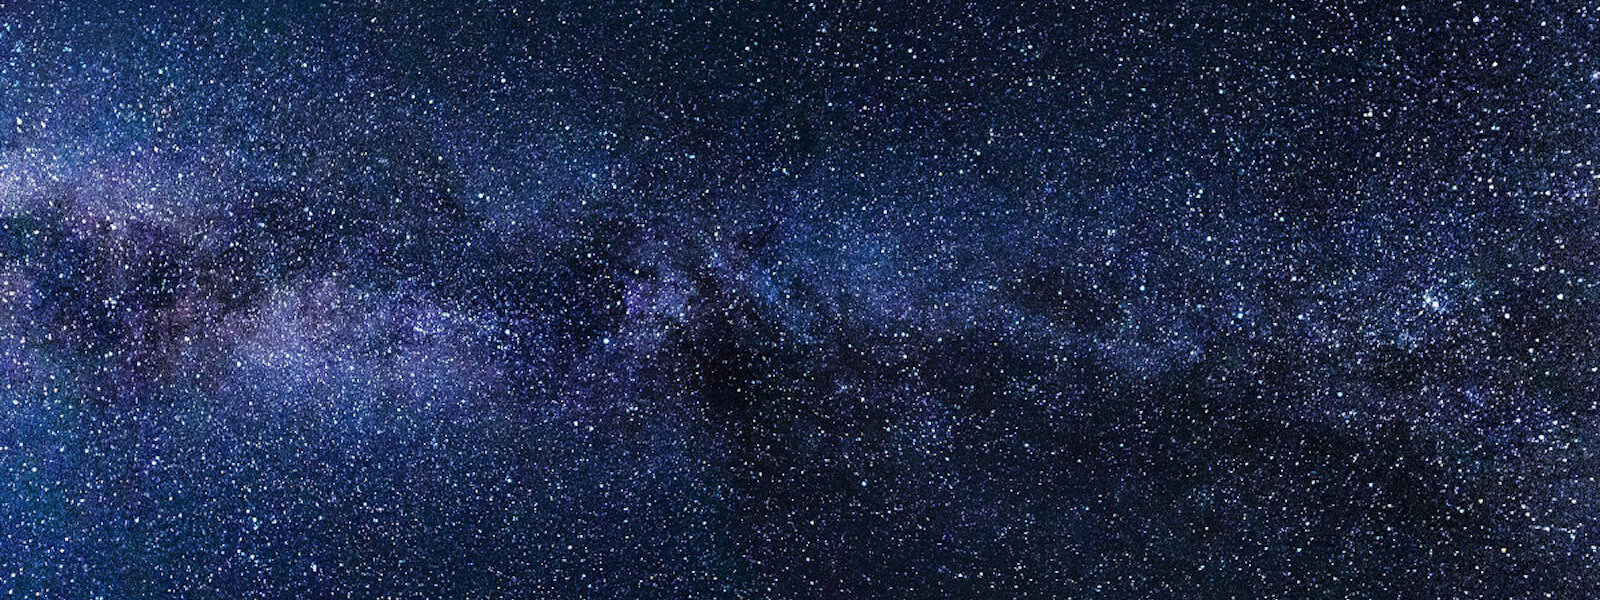 The milky way with millions of stars, a dark starry sky.